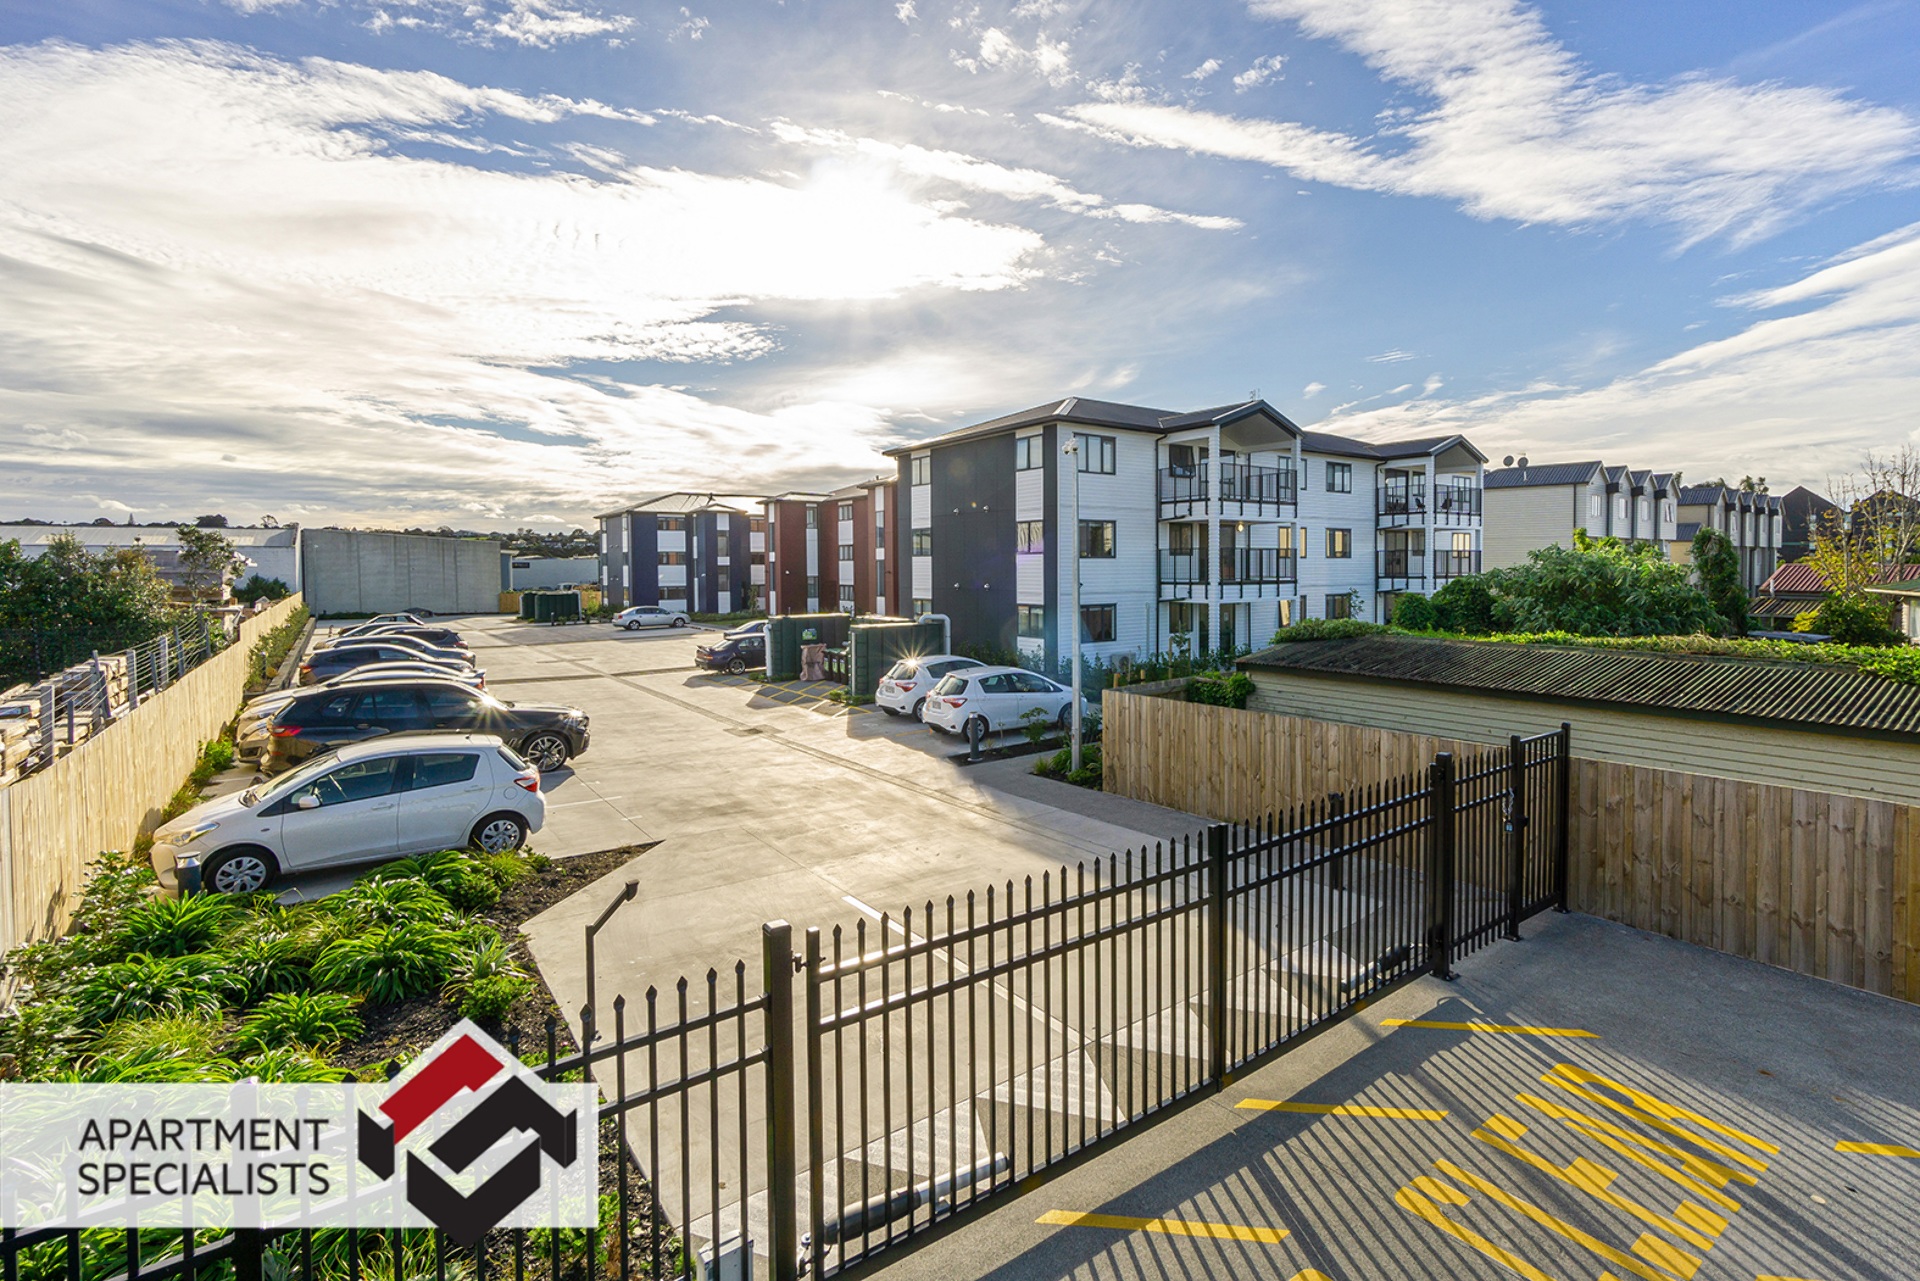 13 | 57 Henderson Valley Road, Henderson Valley | Apartment Specialists